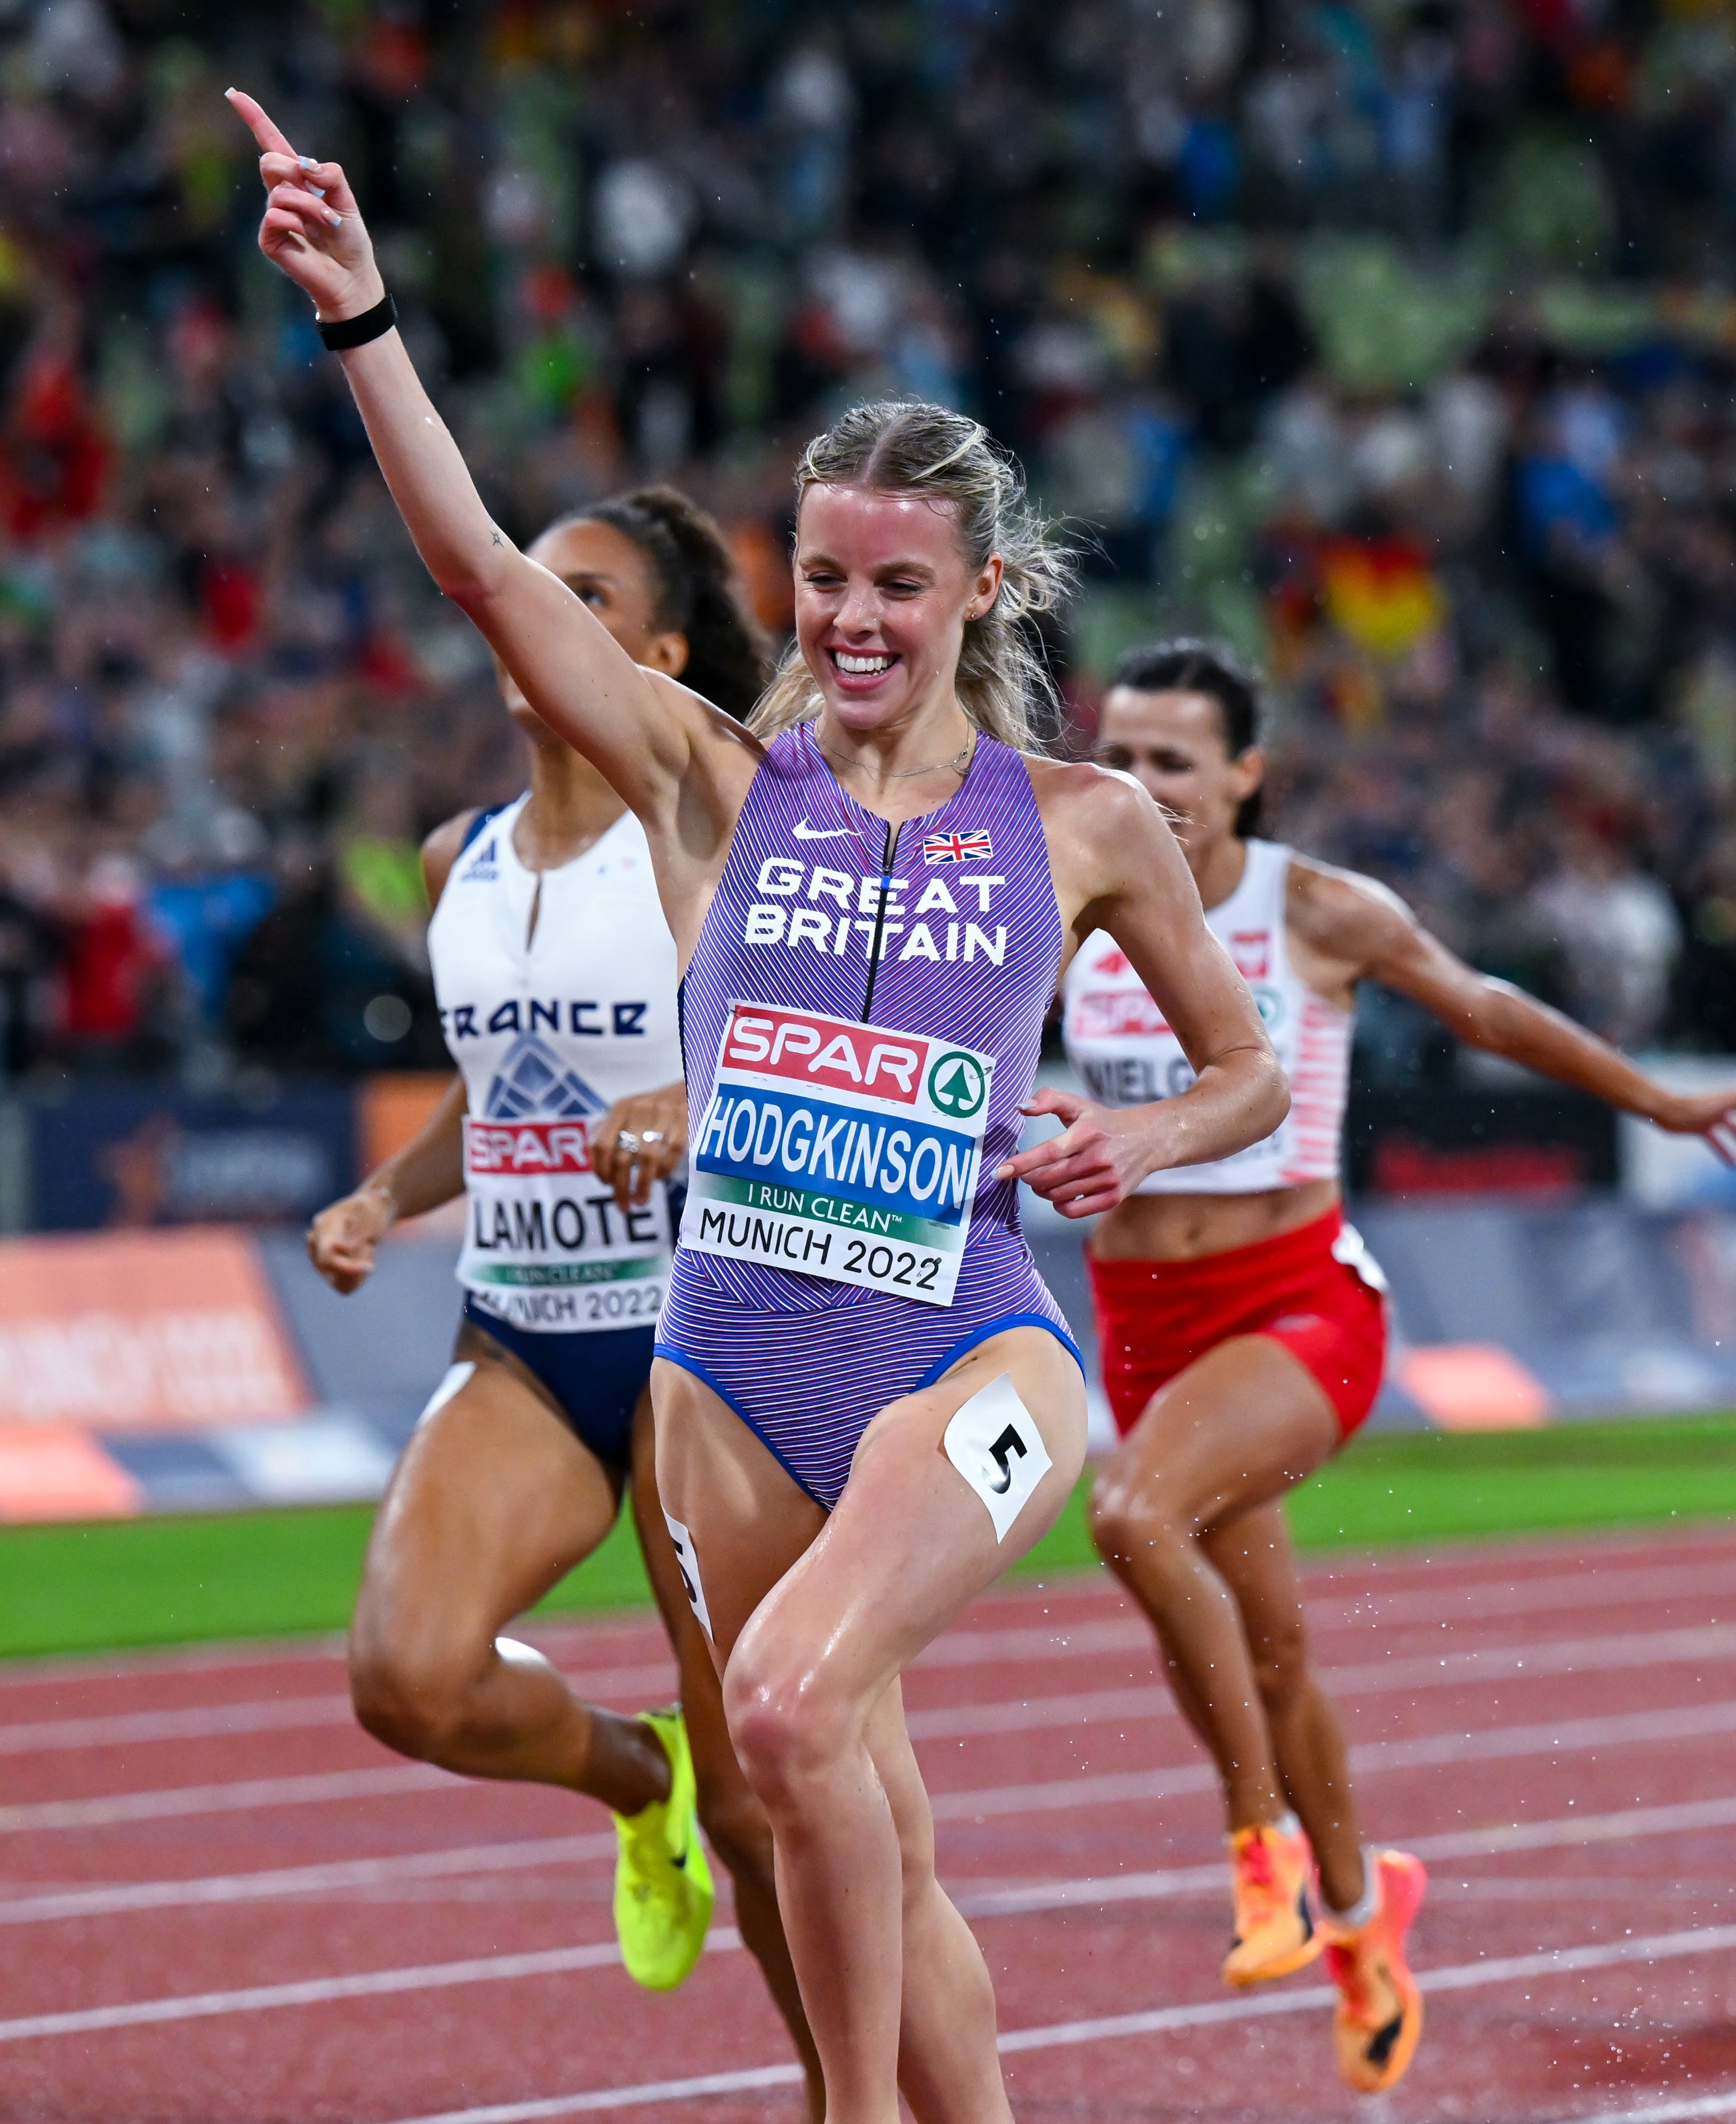 Great Britain’s Keely Hodgkinson celebrates winning the women’s 800m final at the European Championships in Munich (Sven Hoppe/DPA)